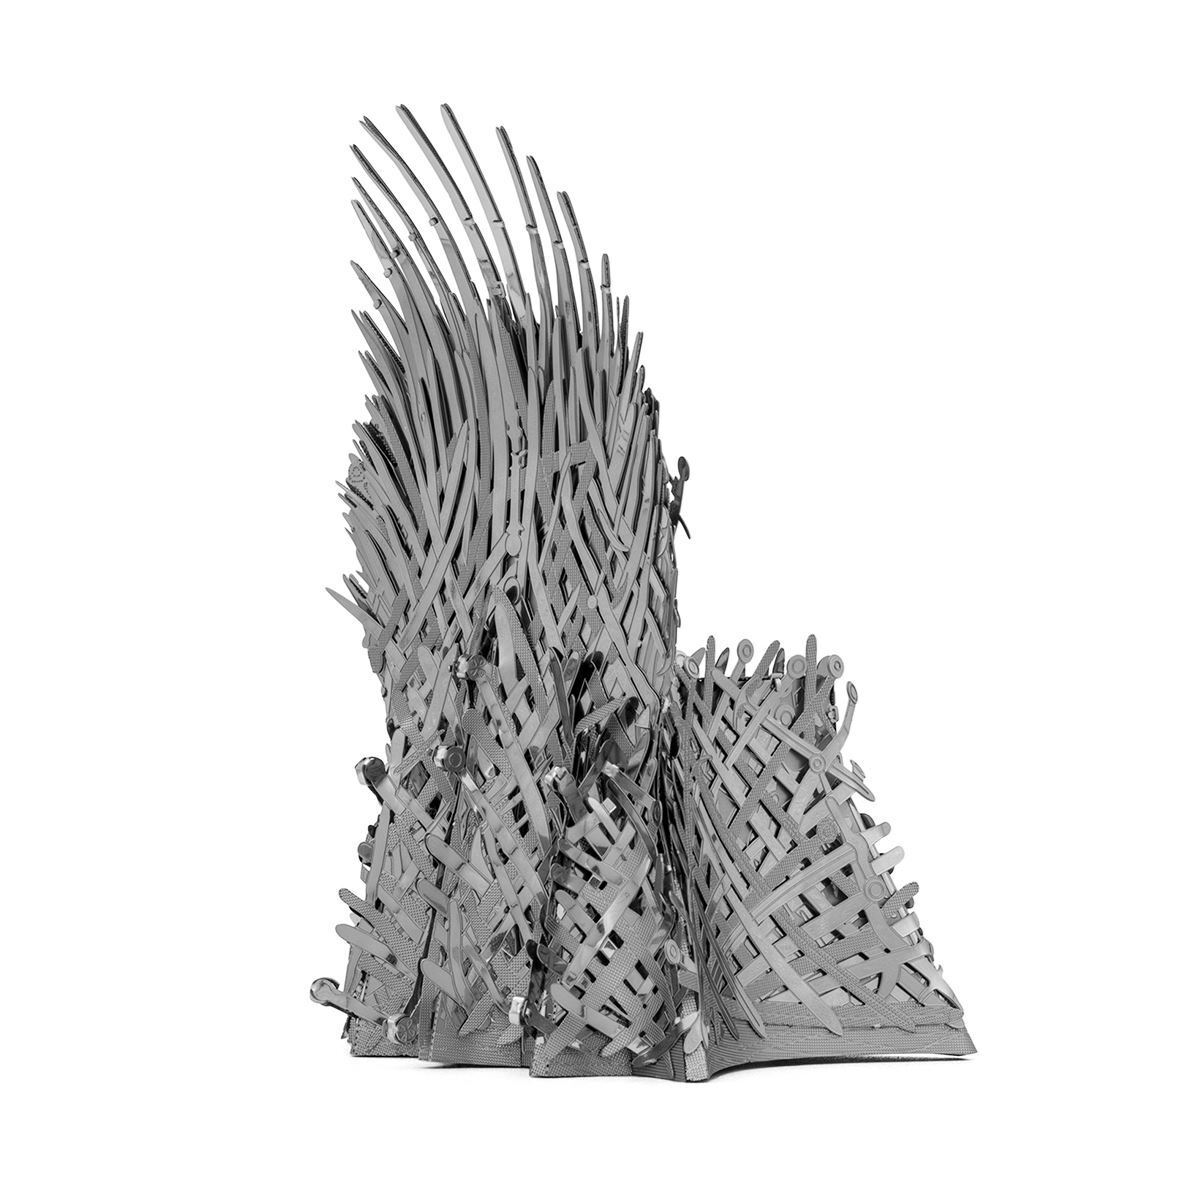 Fascinations ICONX Game Of Thrones Iron Throne - Hobbytech Toys